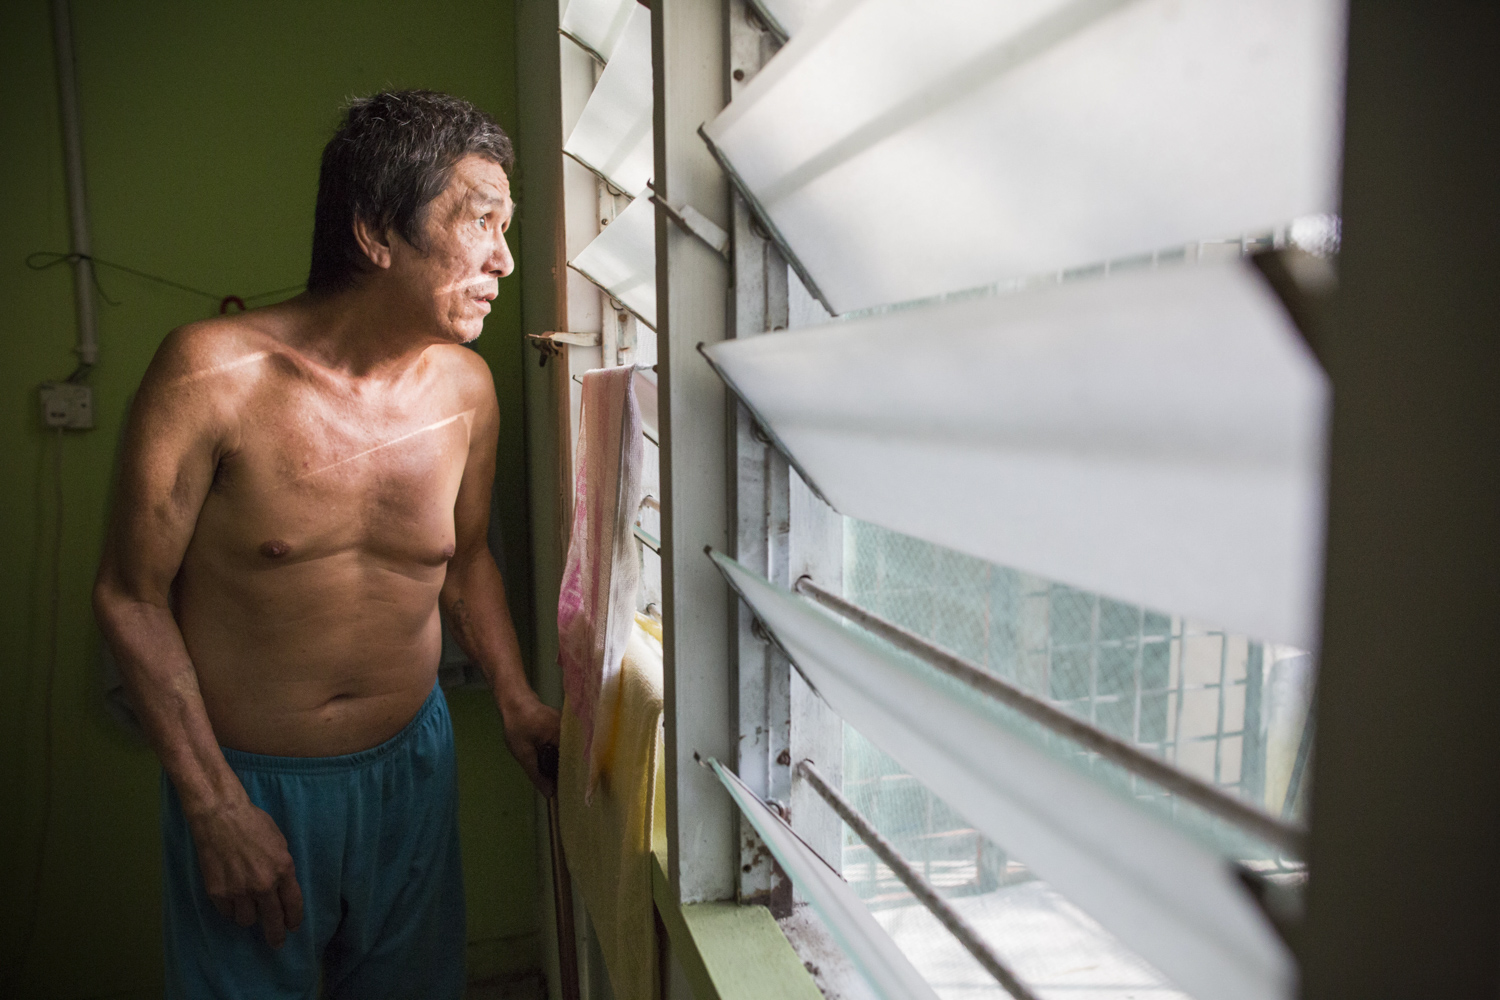 52 year-old Mr Guo has spent 5 years living at PLC. When he first learned that he contracted HIV, he left his wife and 7 year-old son to move elsewhere, fearing rejection from his family. It has been 12 years since he first left home, but he hasn’t yet mustered the courage to face his family. He thinks of them often.